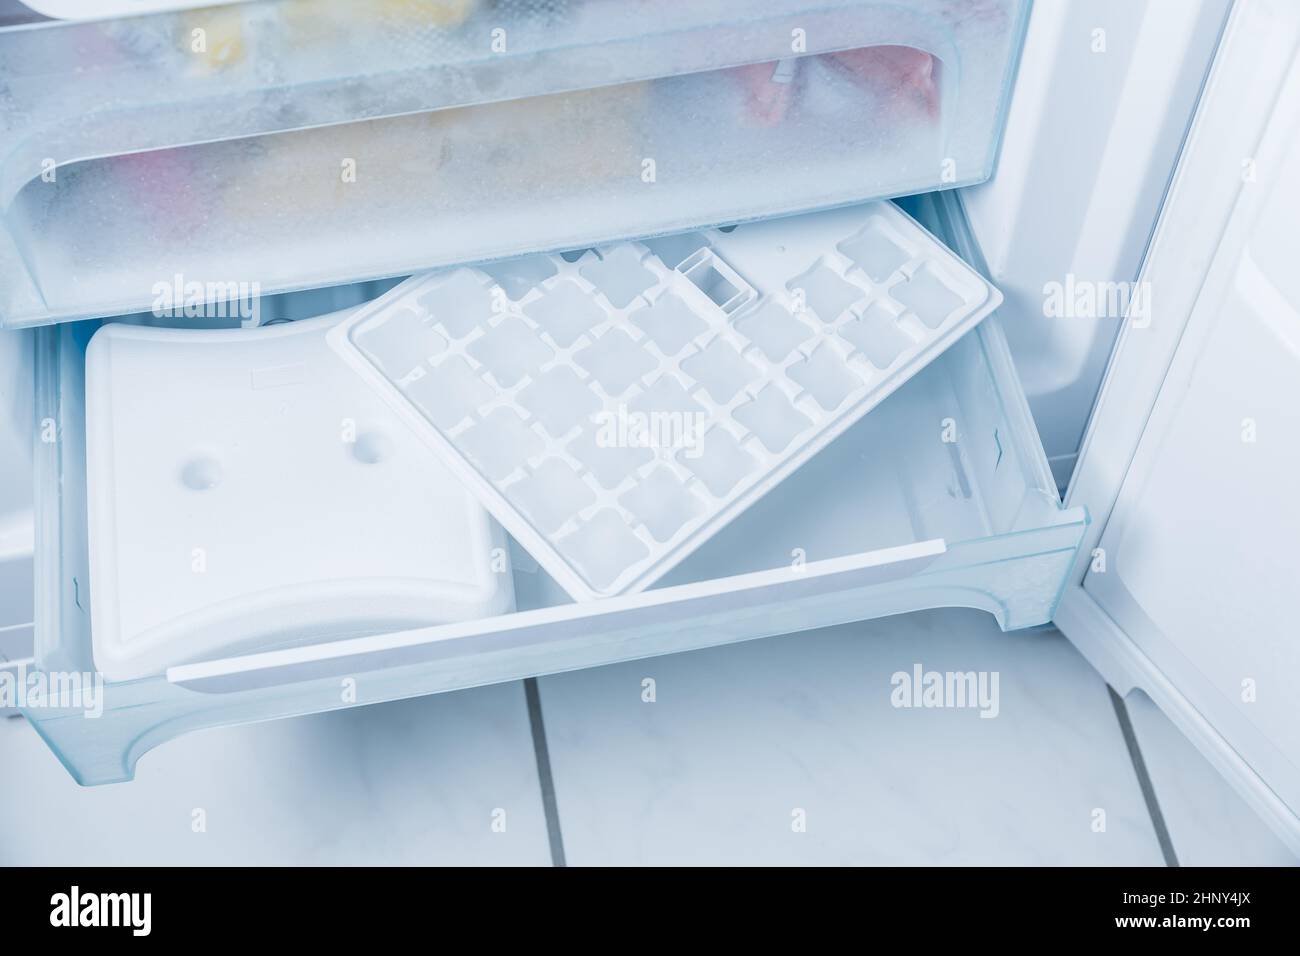 https://c8.alamy.com/comp/2HNY4JX/ice-cube-maker-in-modern-freezer-with-no-frost-houseold-concept-2HNY4JX.jpg